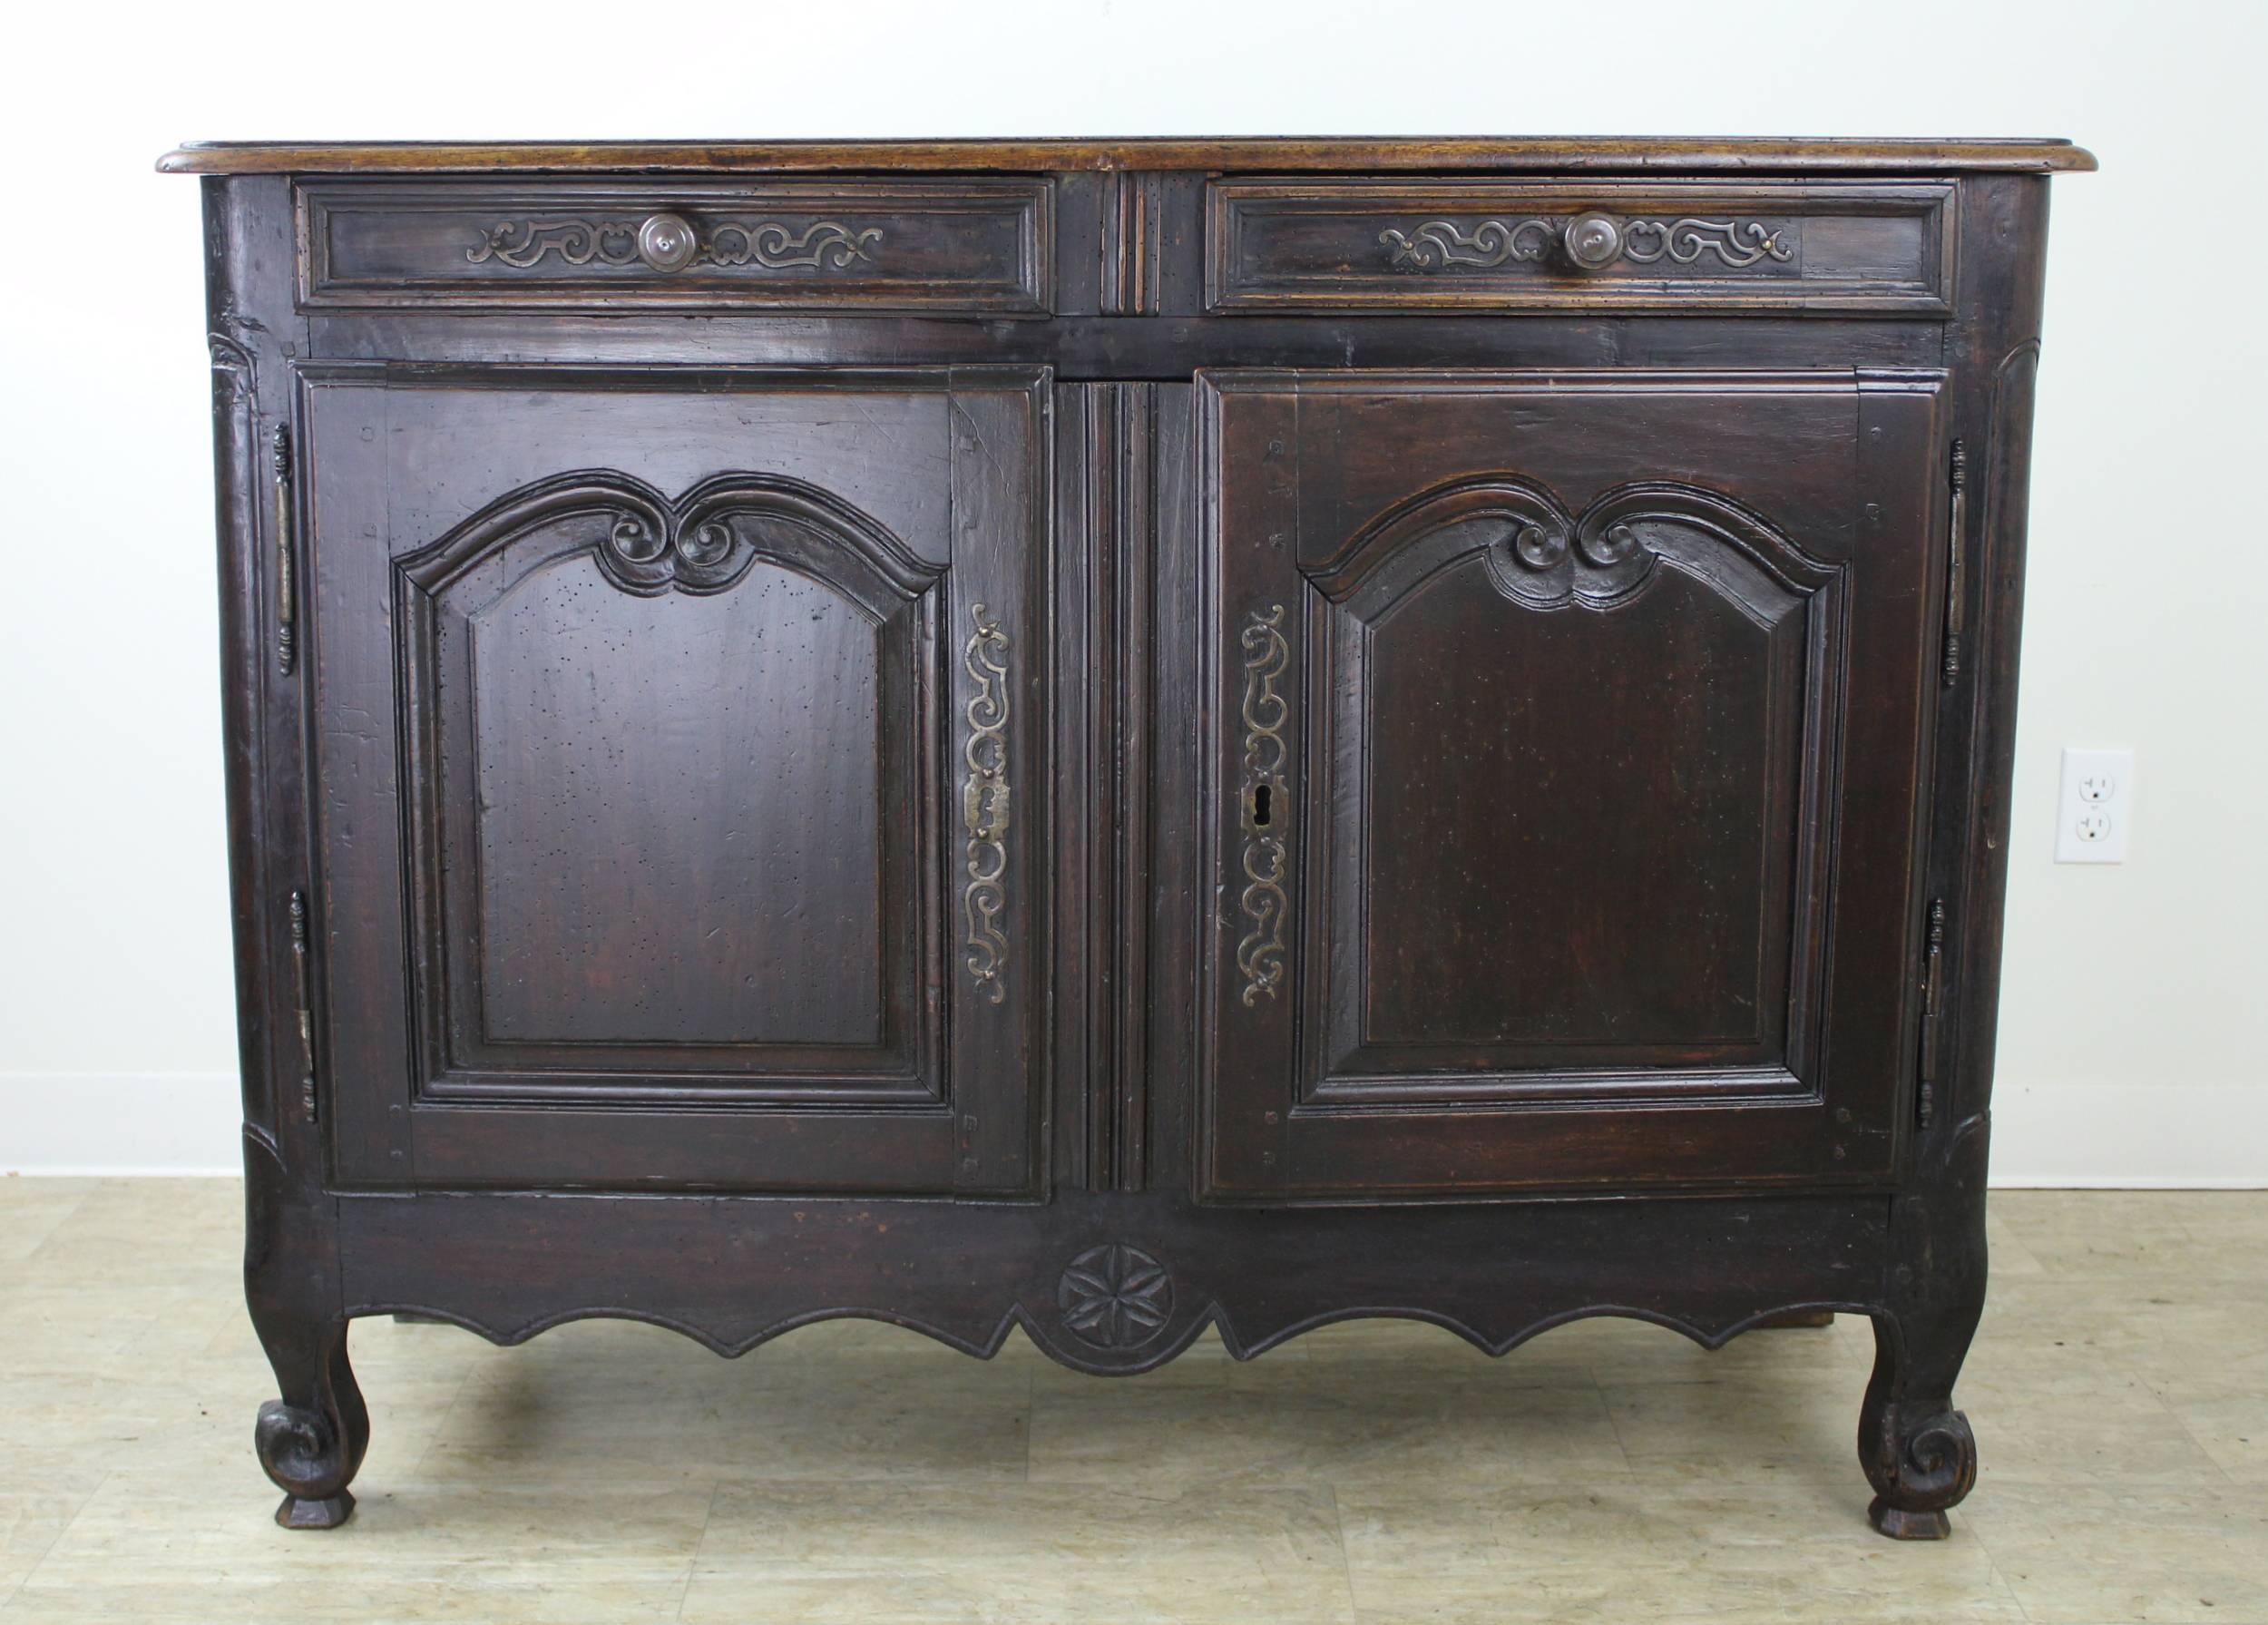 An early dark walnut buffet with fabulous iron hardware, snail feet, and a charming carved apron with a hand-wrought medallion detail. Inset panels on both doors and the sides. The wood has a rich, authentic patina and the single interior shelf is